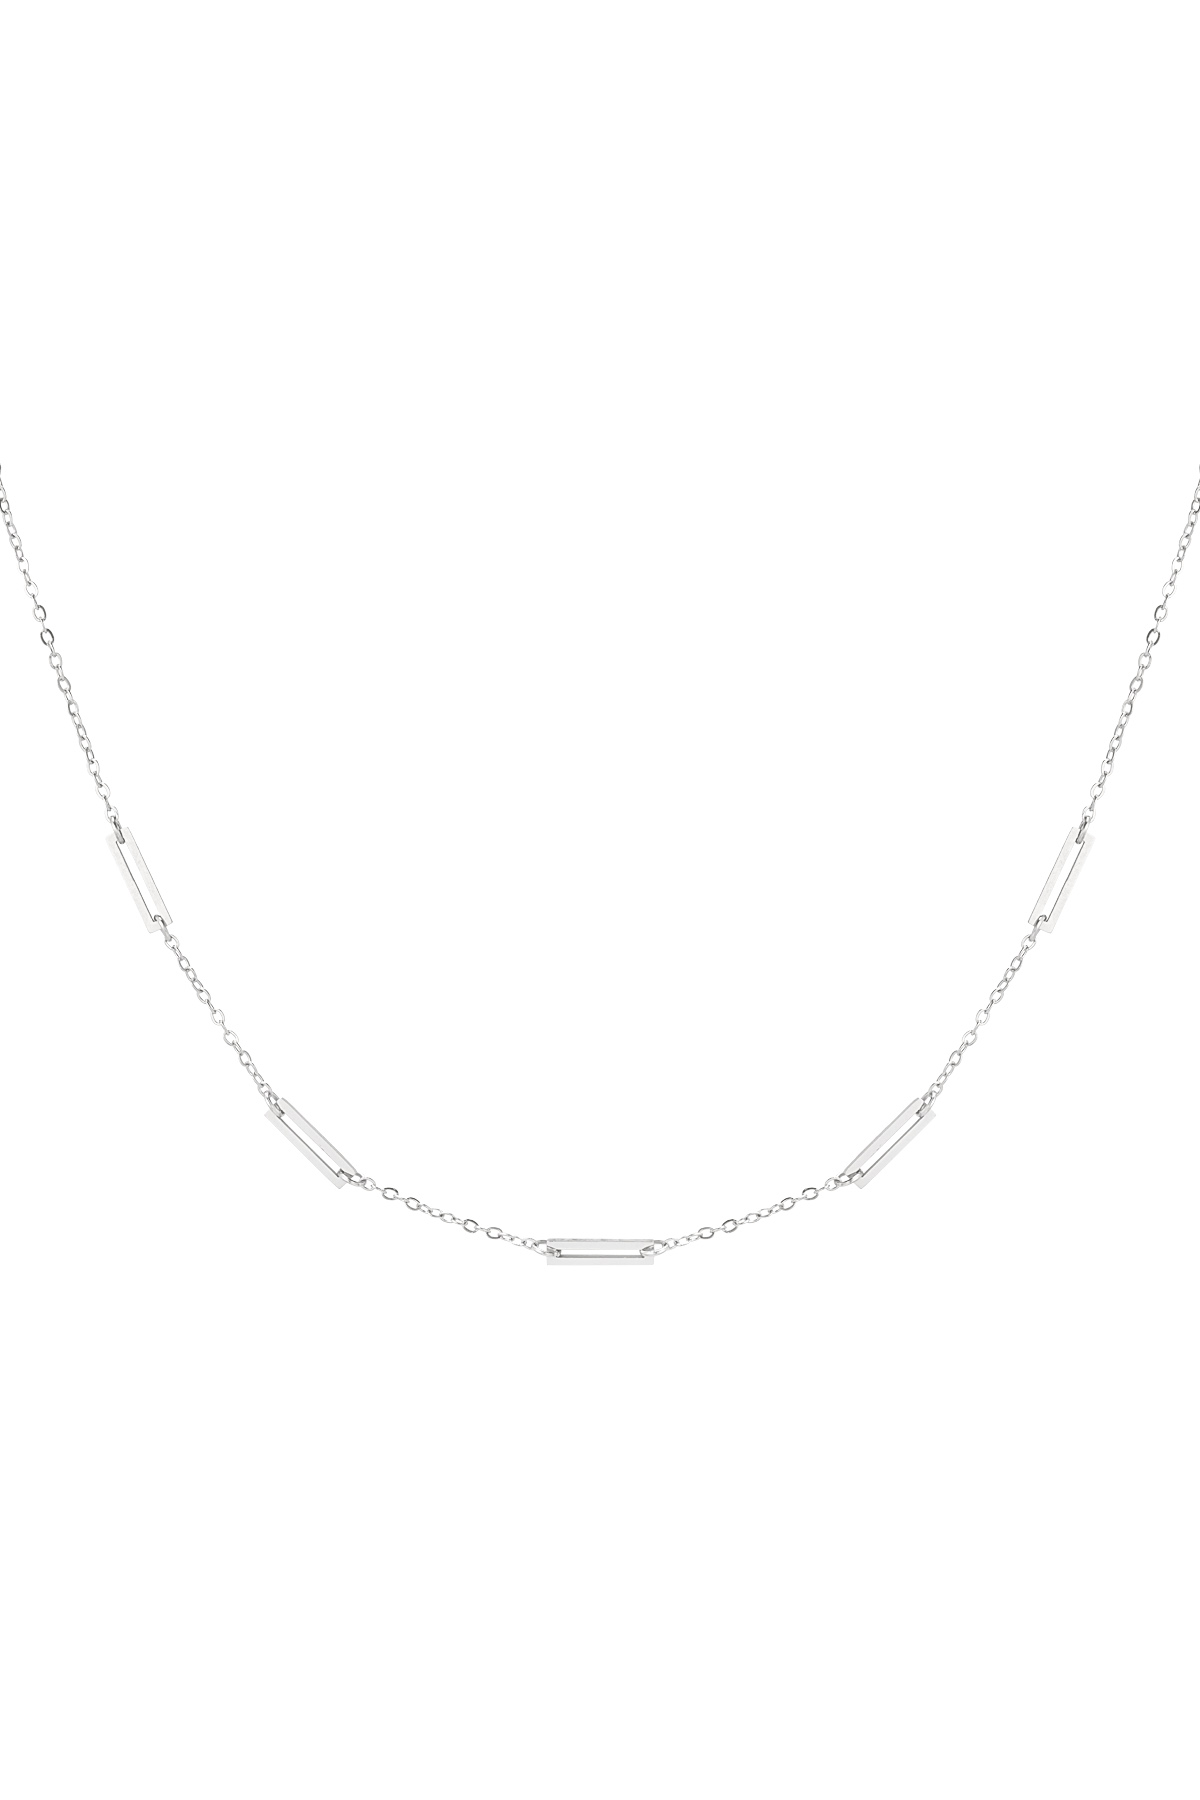 Necklace 5 links - silver